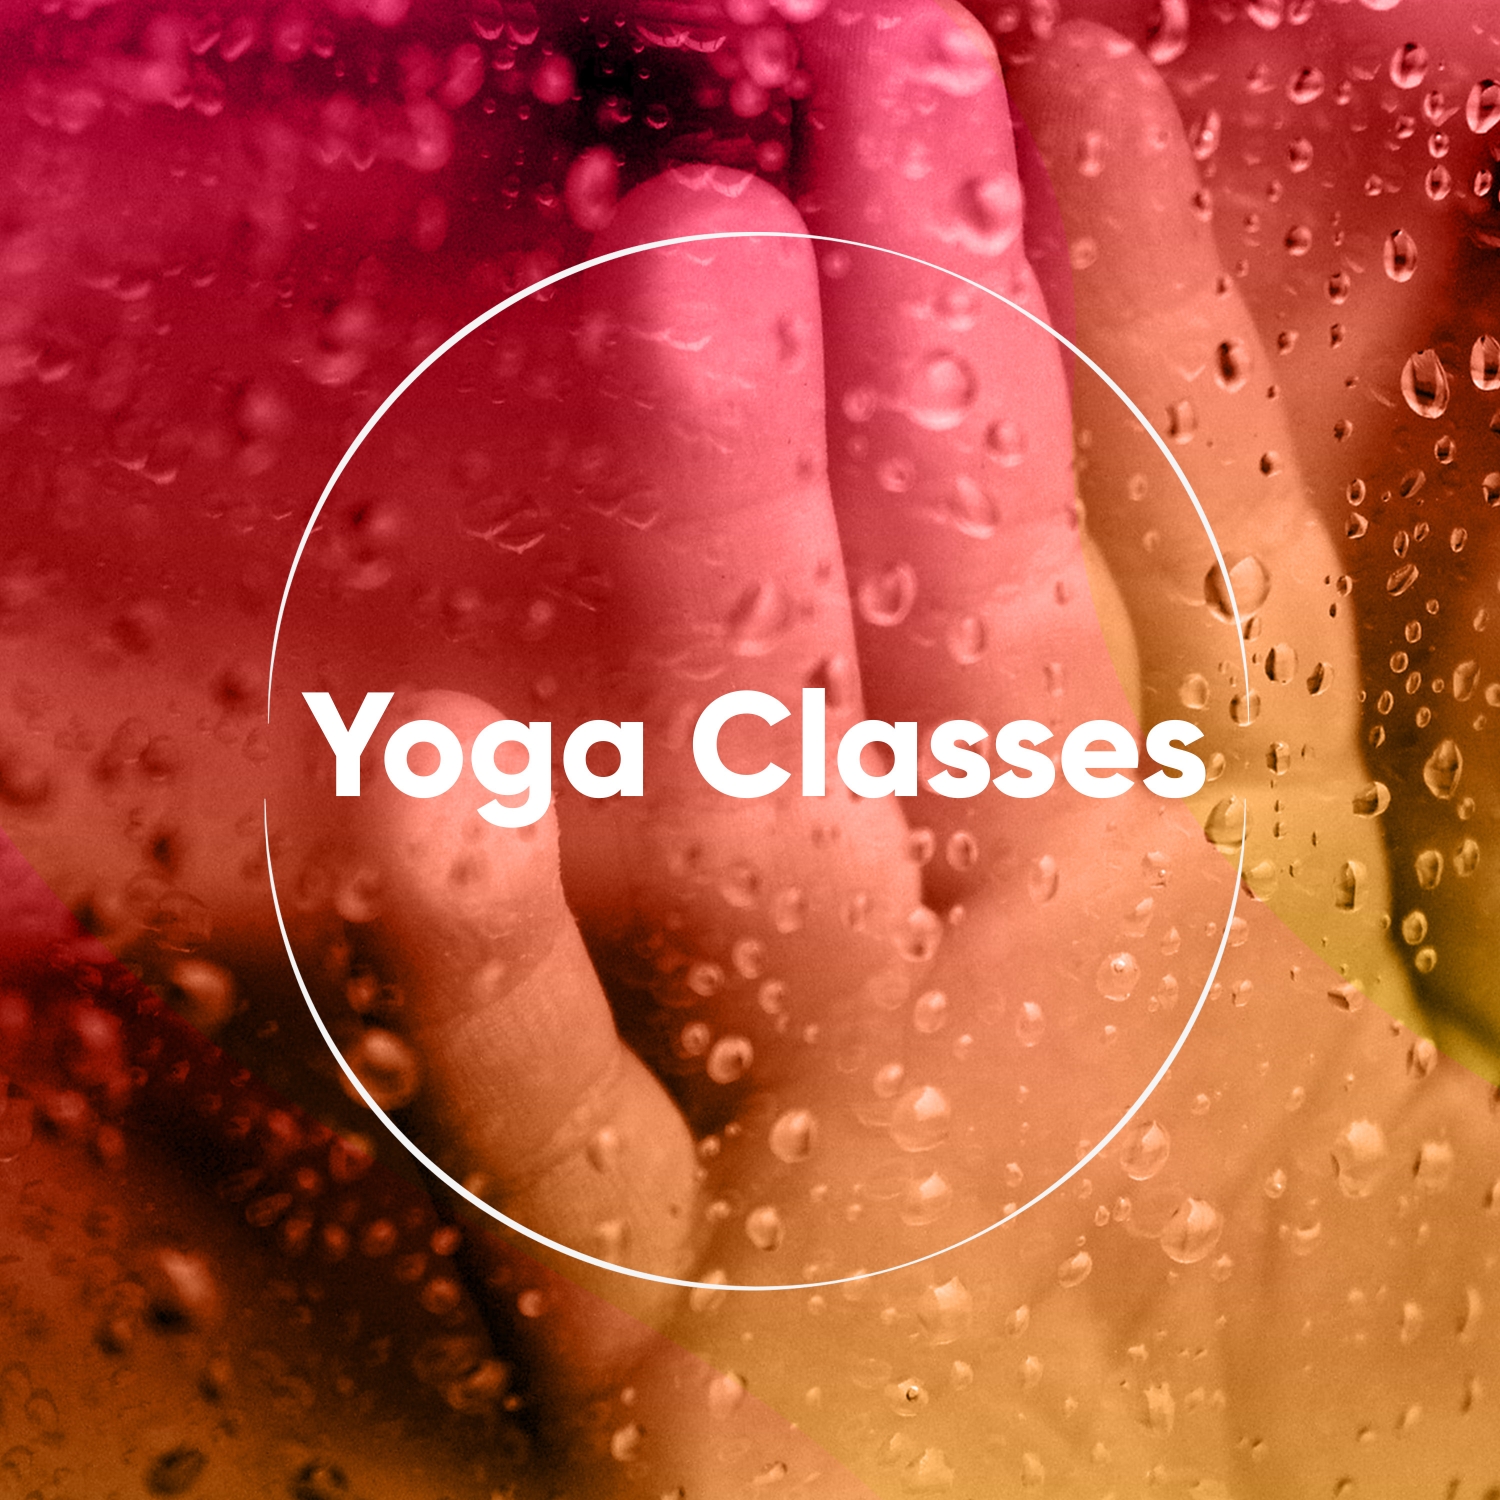 14 Yoga Sounds from Nature - Perfect for Classes